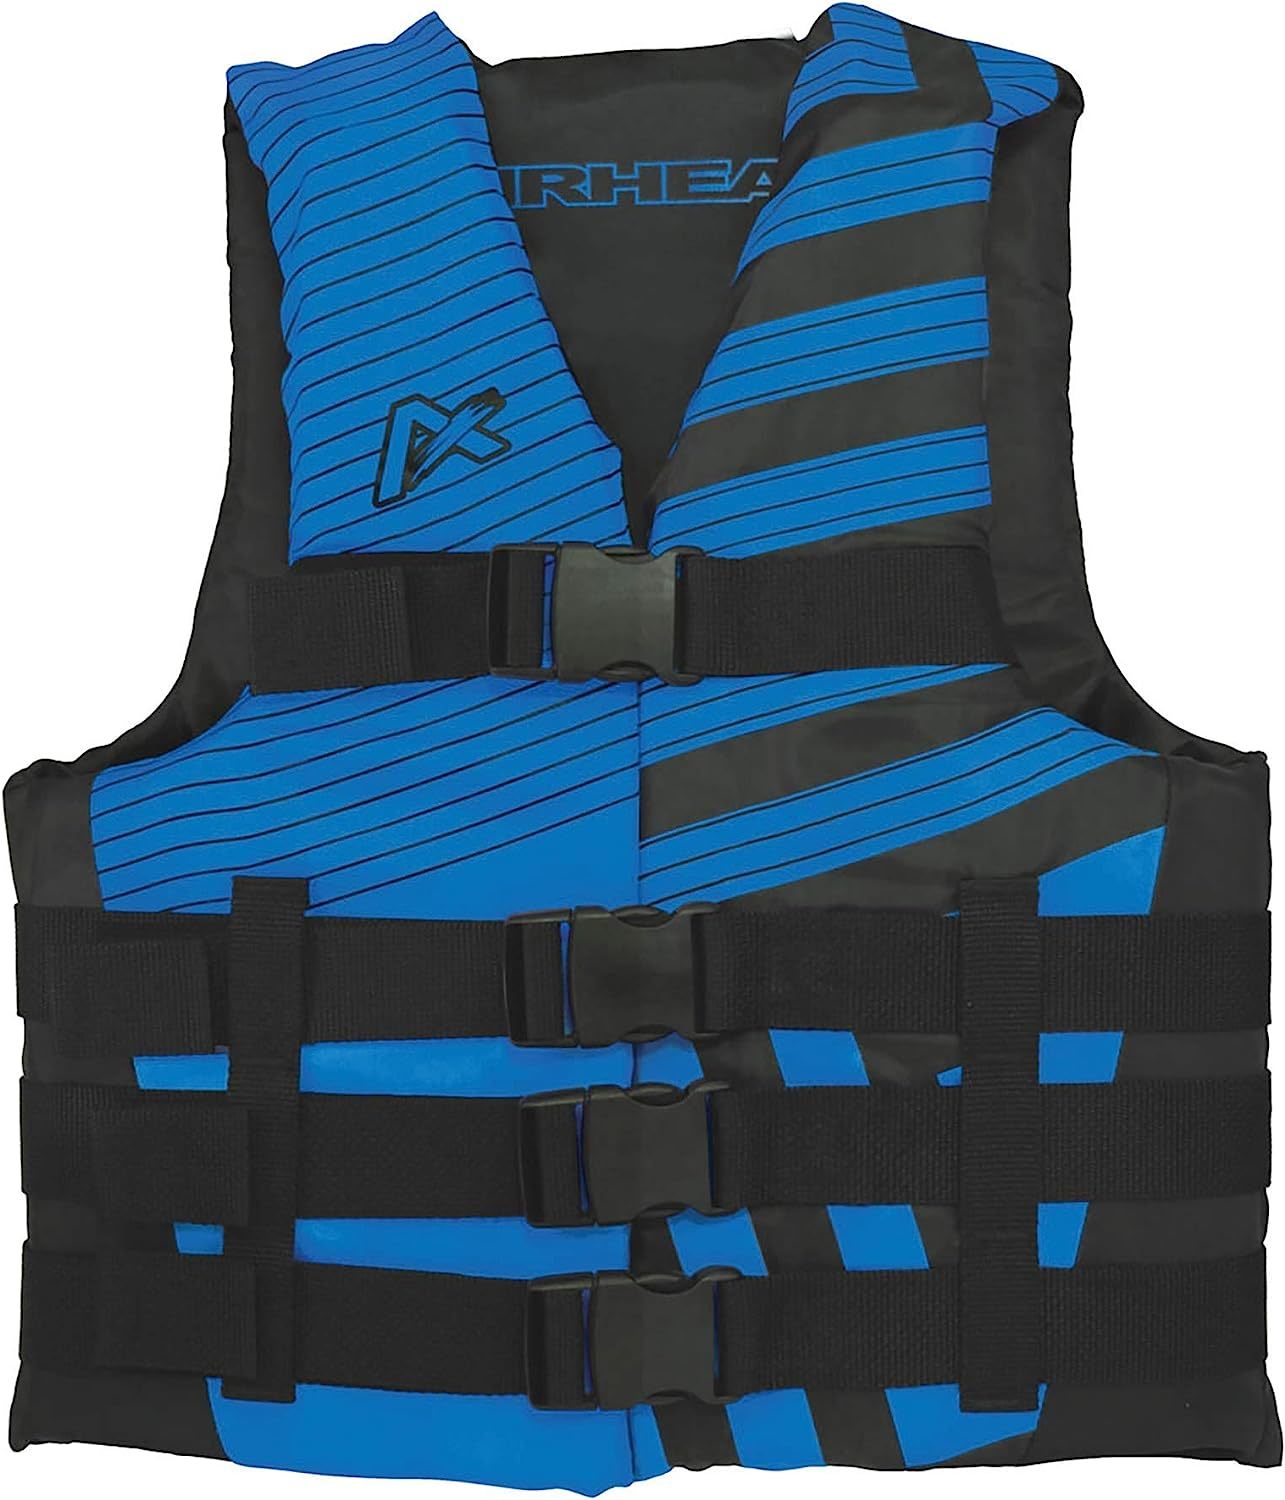 Young People, Adults, And Women Can All Wear The Airhead Trend Life Vest In Pink - $45.96